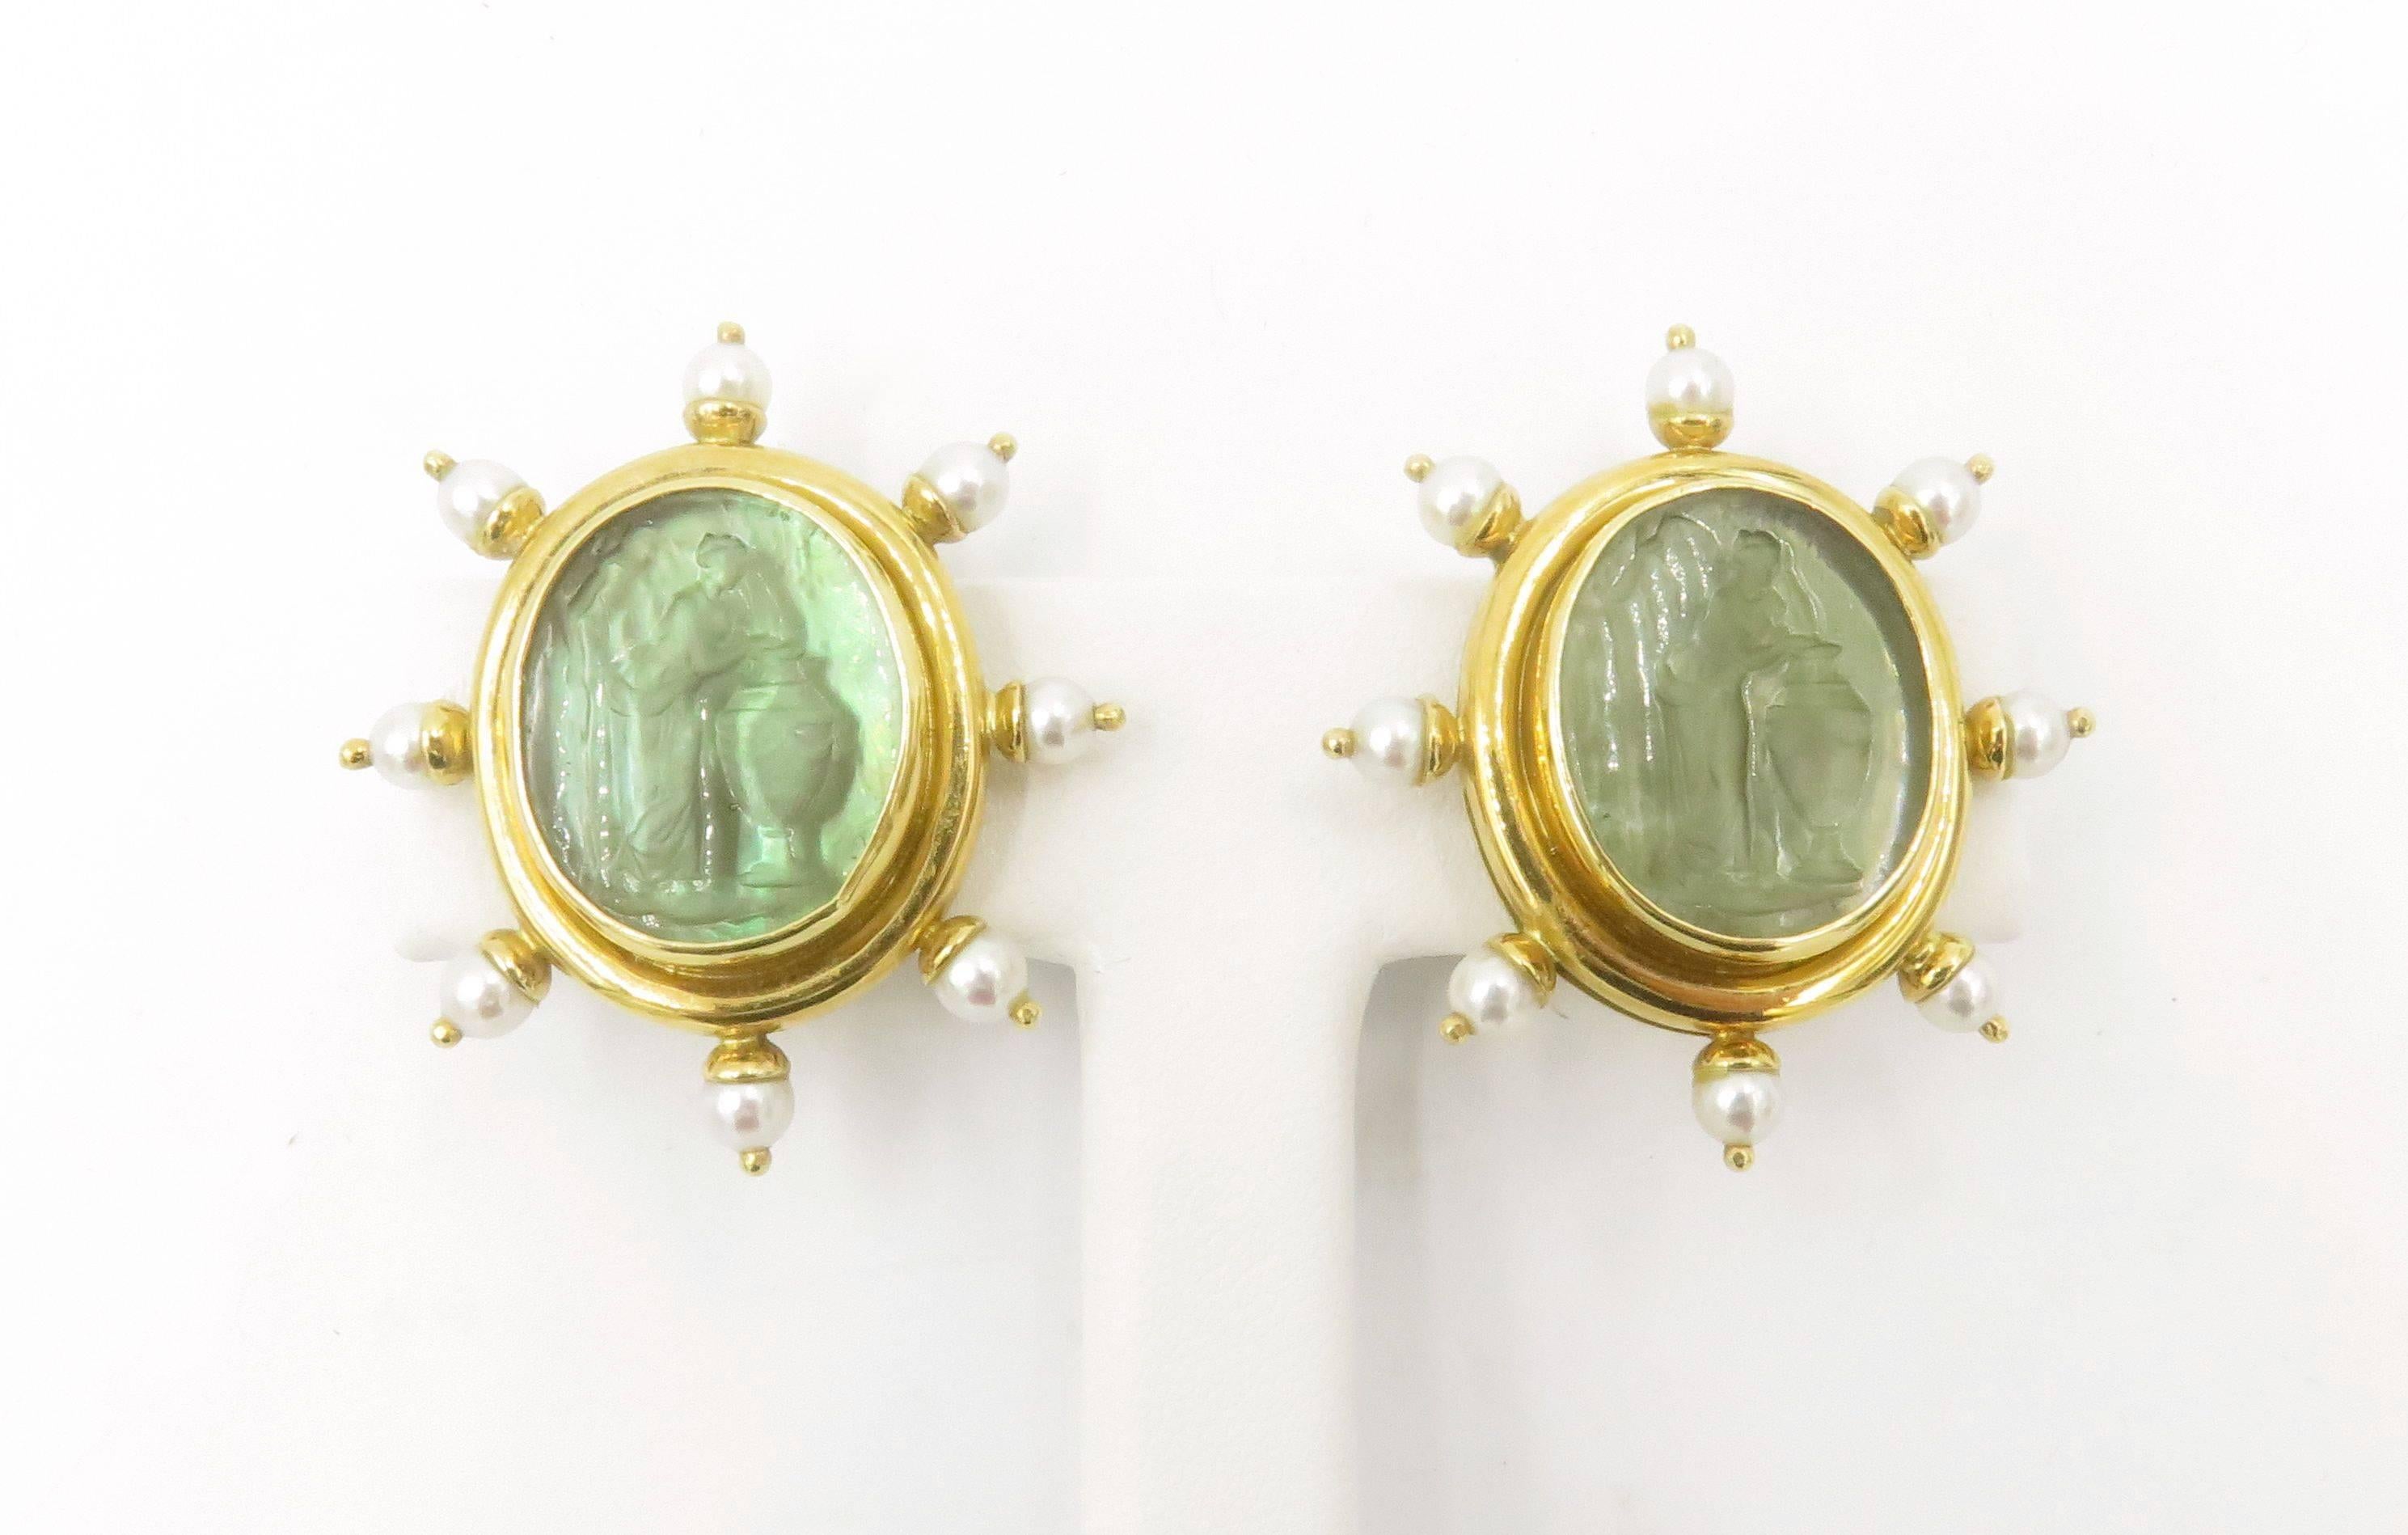 A pair of An 18 karat yellow gold, venetian glass, seed pearl and mother of pearl earrings. Elizabeth Locke. Of oval outline, set with a sage green Venetian glass intaglio, depicting a classical woman, backed by mother of pearl, within a polished